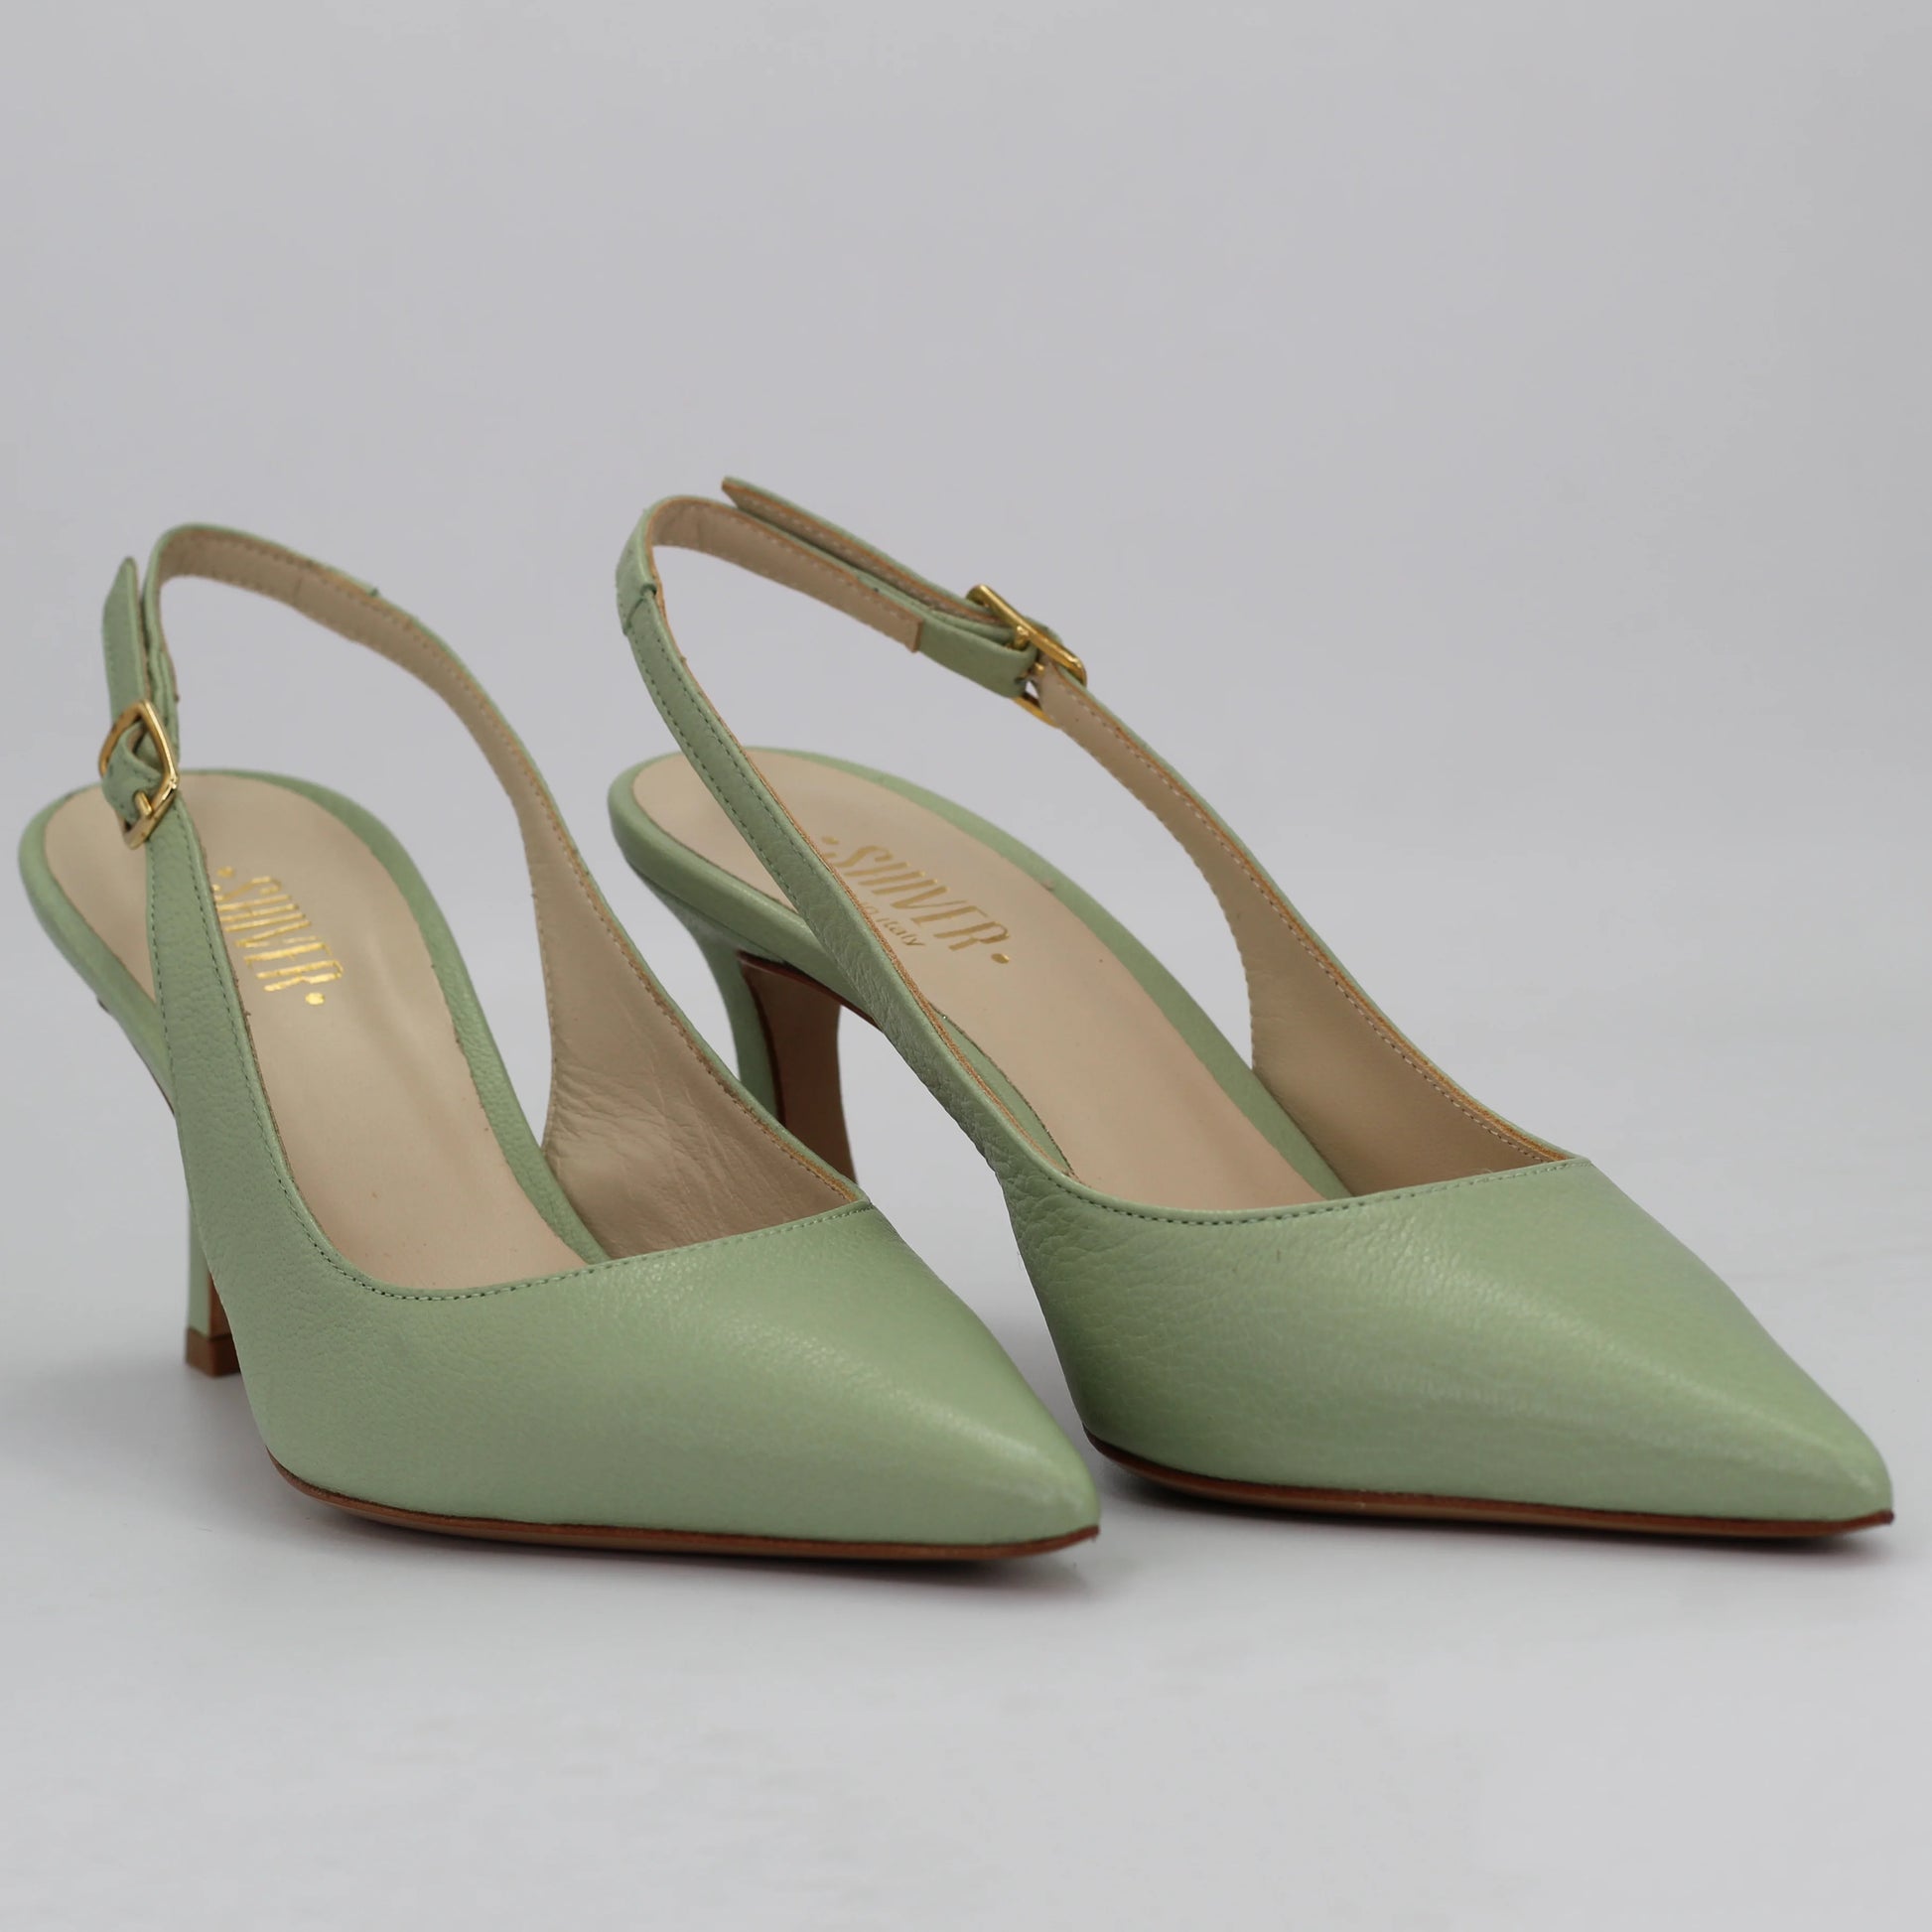 Shop Handmade Italian Leather sling back in Mint (MPE581) or browse our range of hand-made Italian shoes in leather or suede in-store at Aliverti Cape Town, or shop online. We deliver in South Africa & offer multiple payment plans as well as accept multiple safe & secure payment methods.